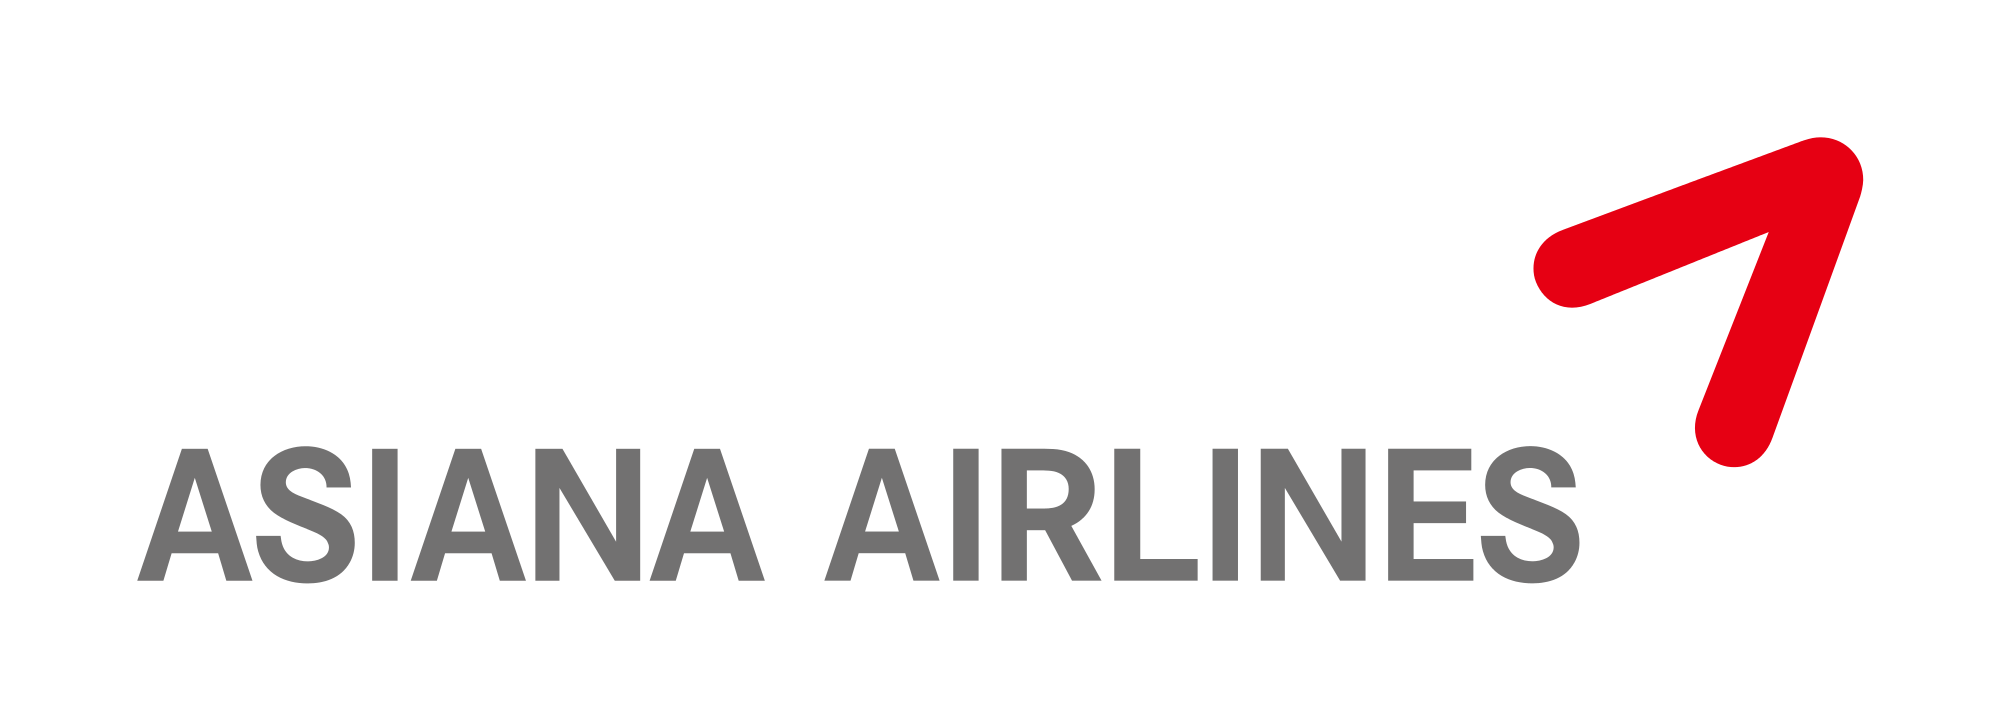 Open  , Asiana Airlines PNG - Free PNG